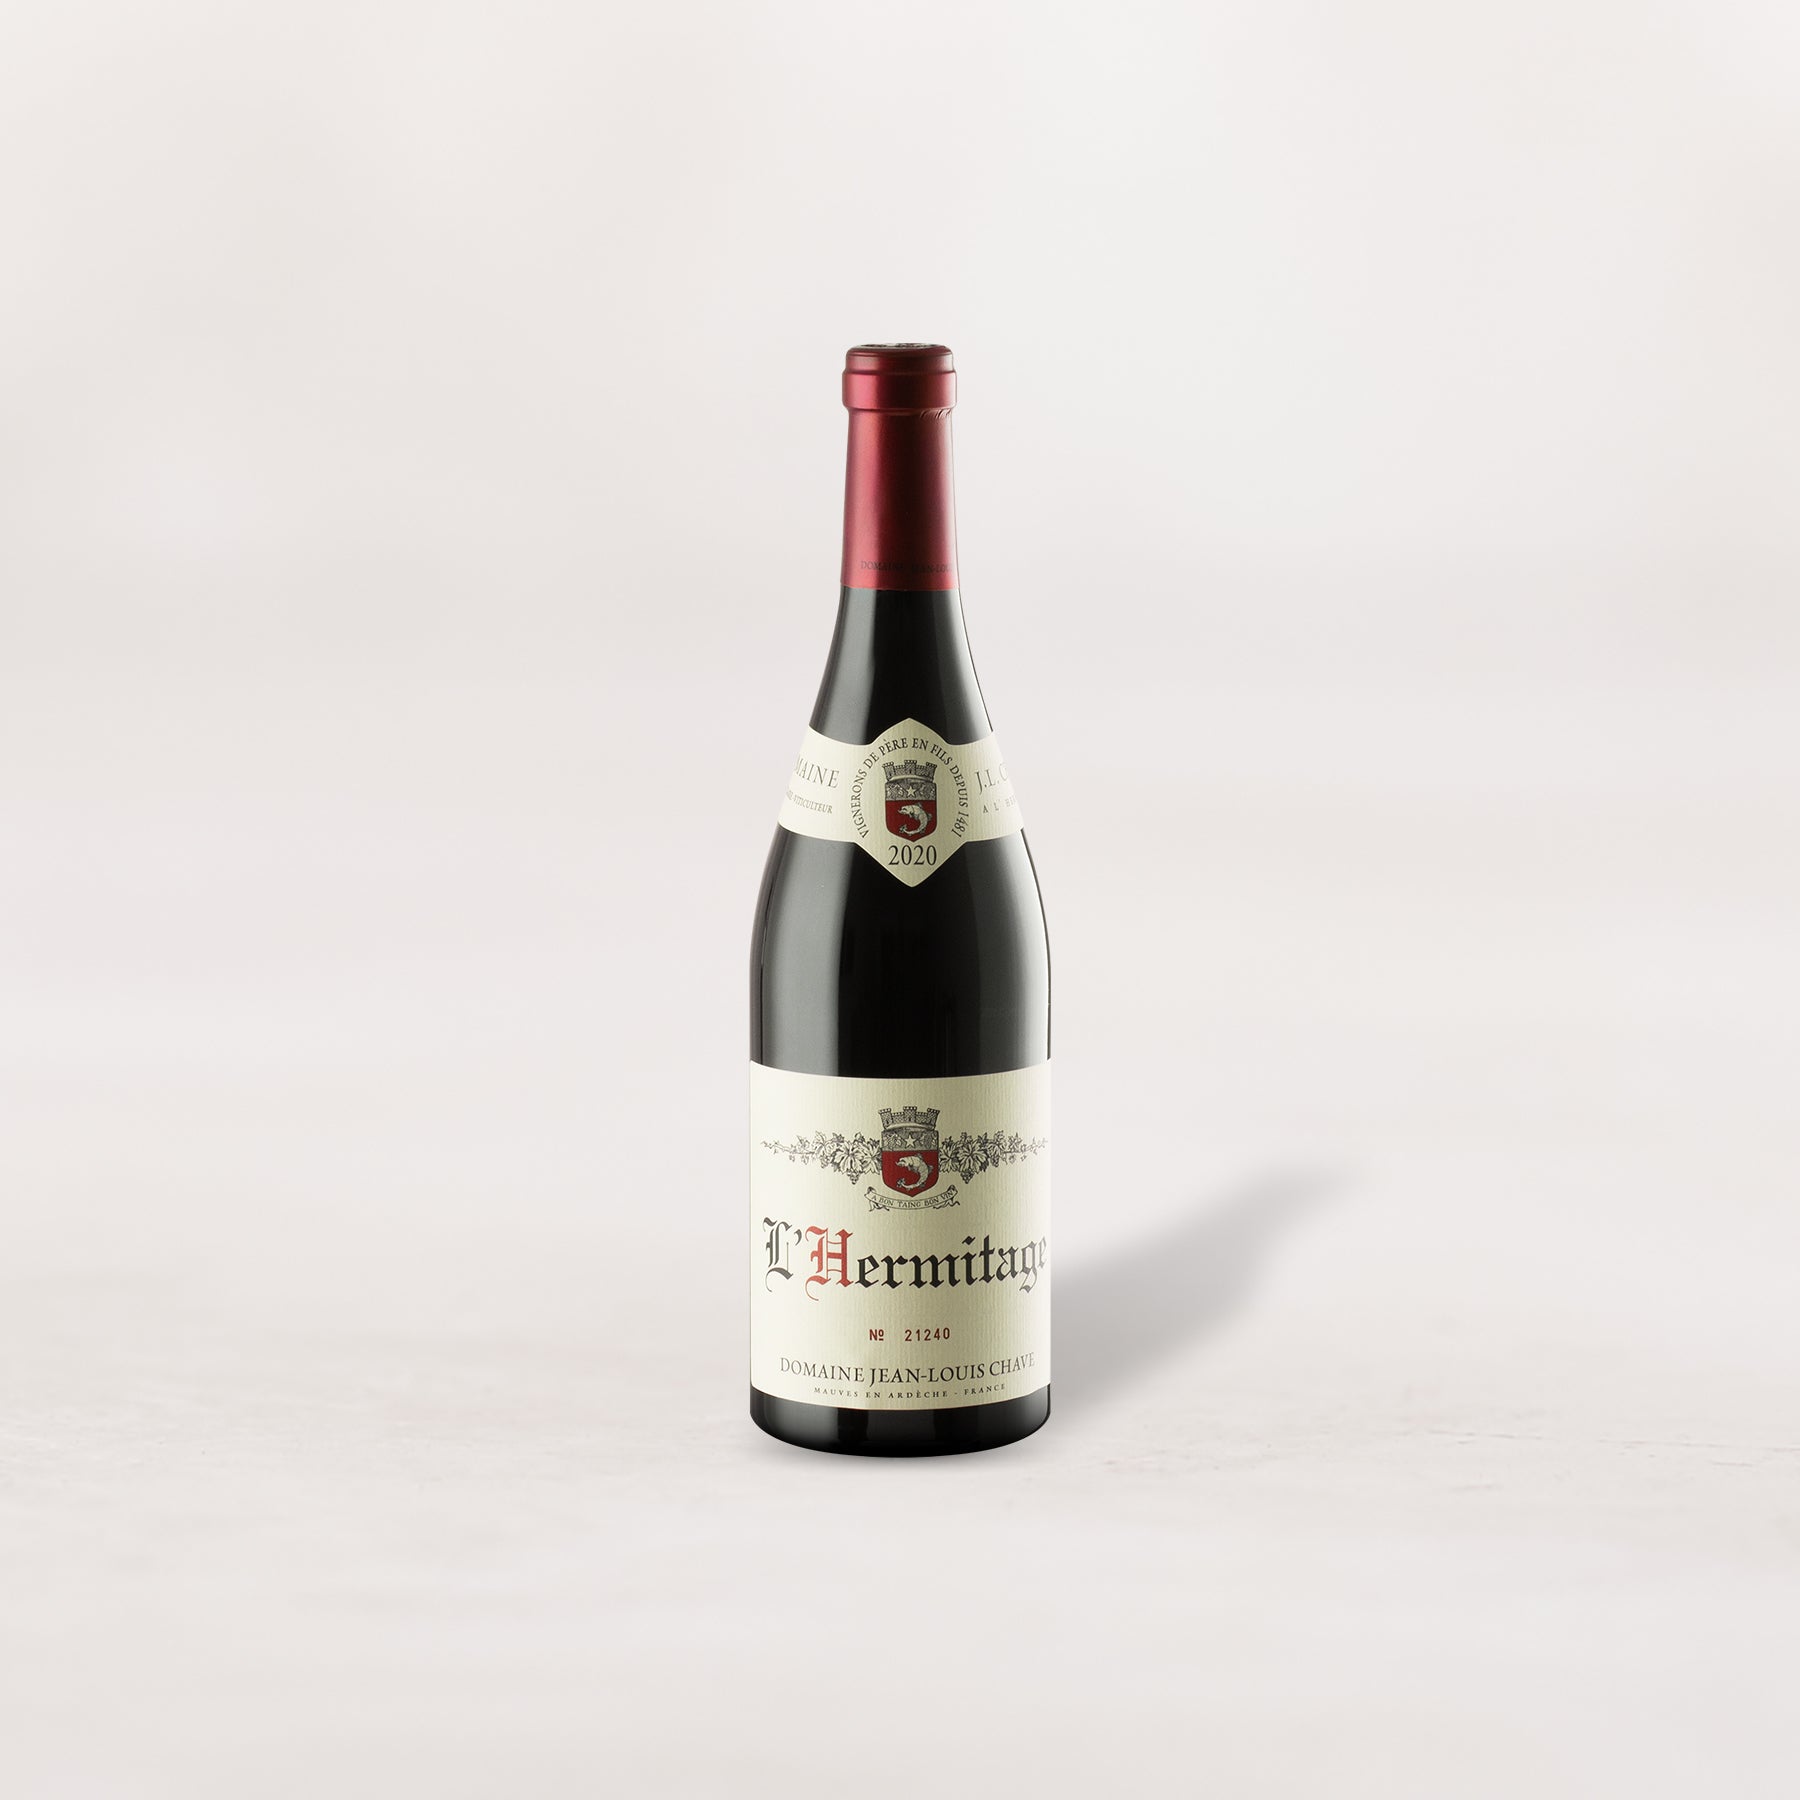 Domaine Jean-Louis Chave, Hermitage Rouge